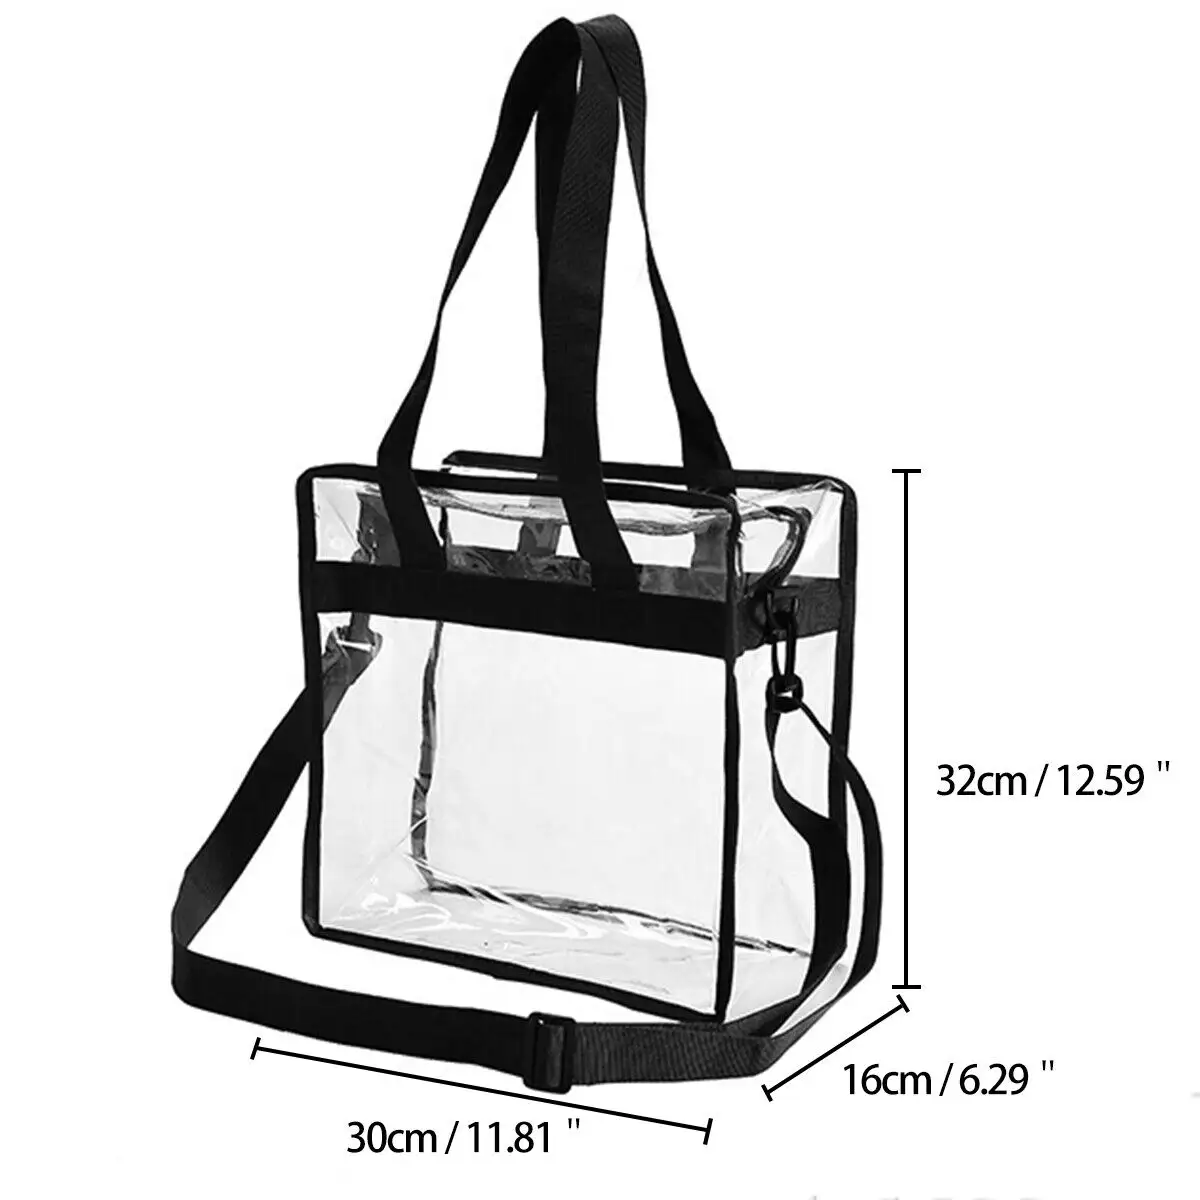 Large Capacity Clear Tote Bag with Handle and Adjustable Strap Durable PVC Shoulder Bag Waterproof Multifunctional Storage Bag